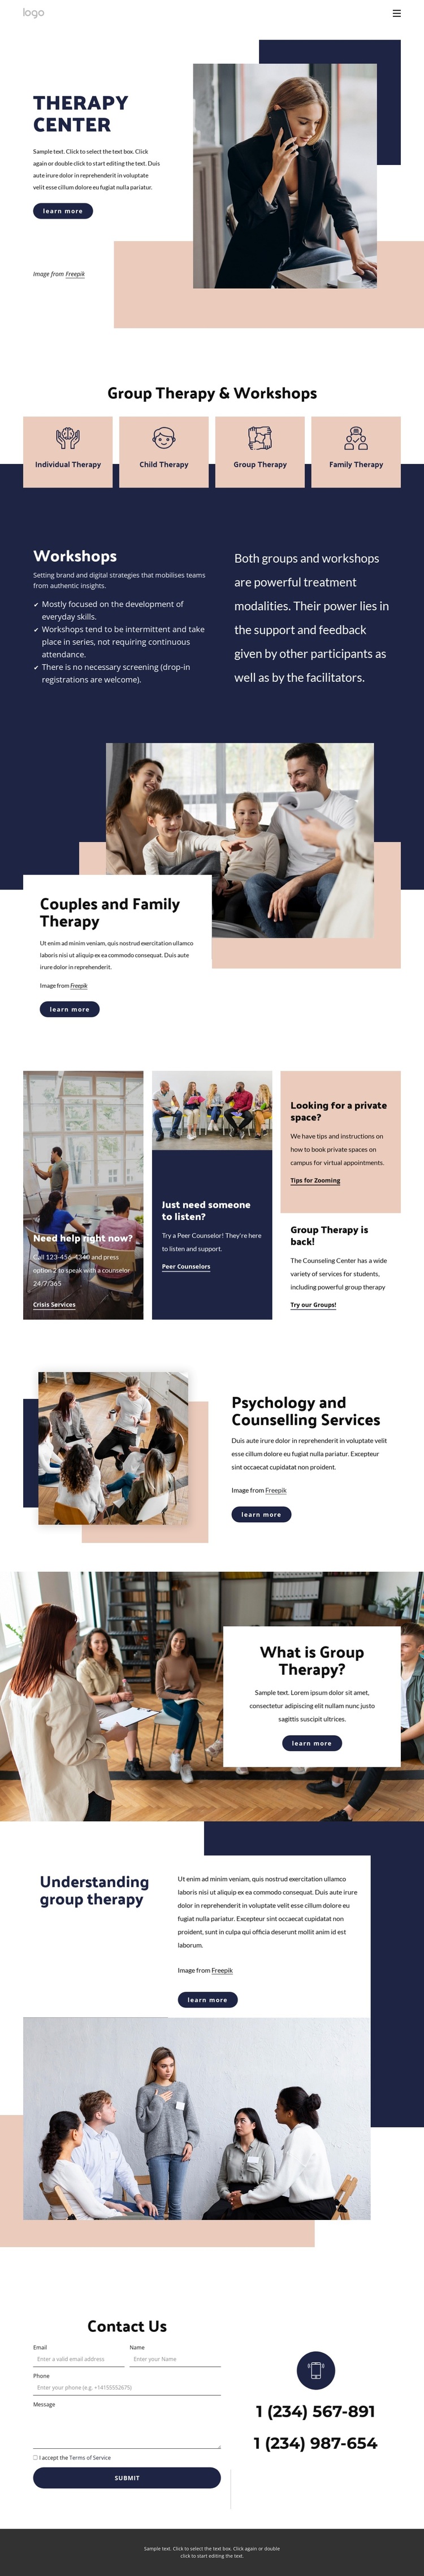 Therapy center Joomla Page Builder